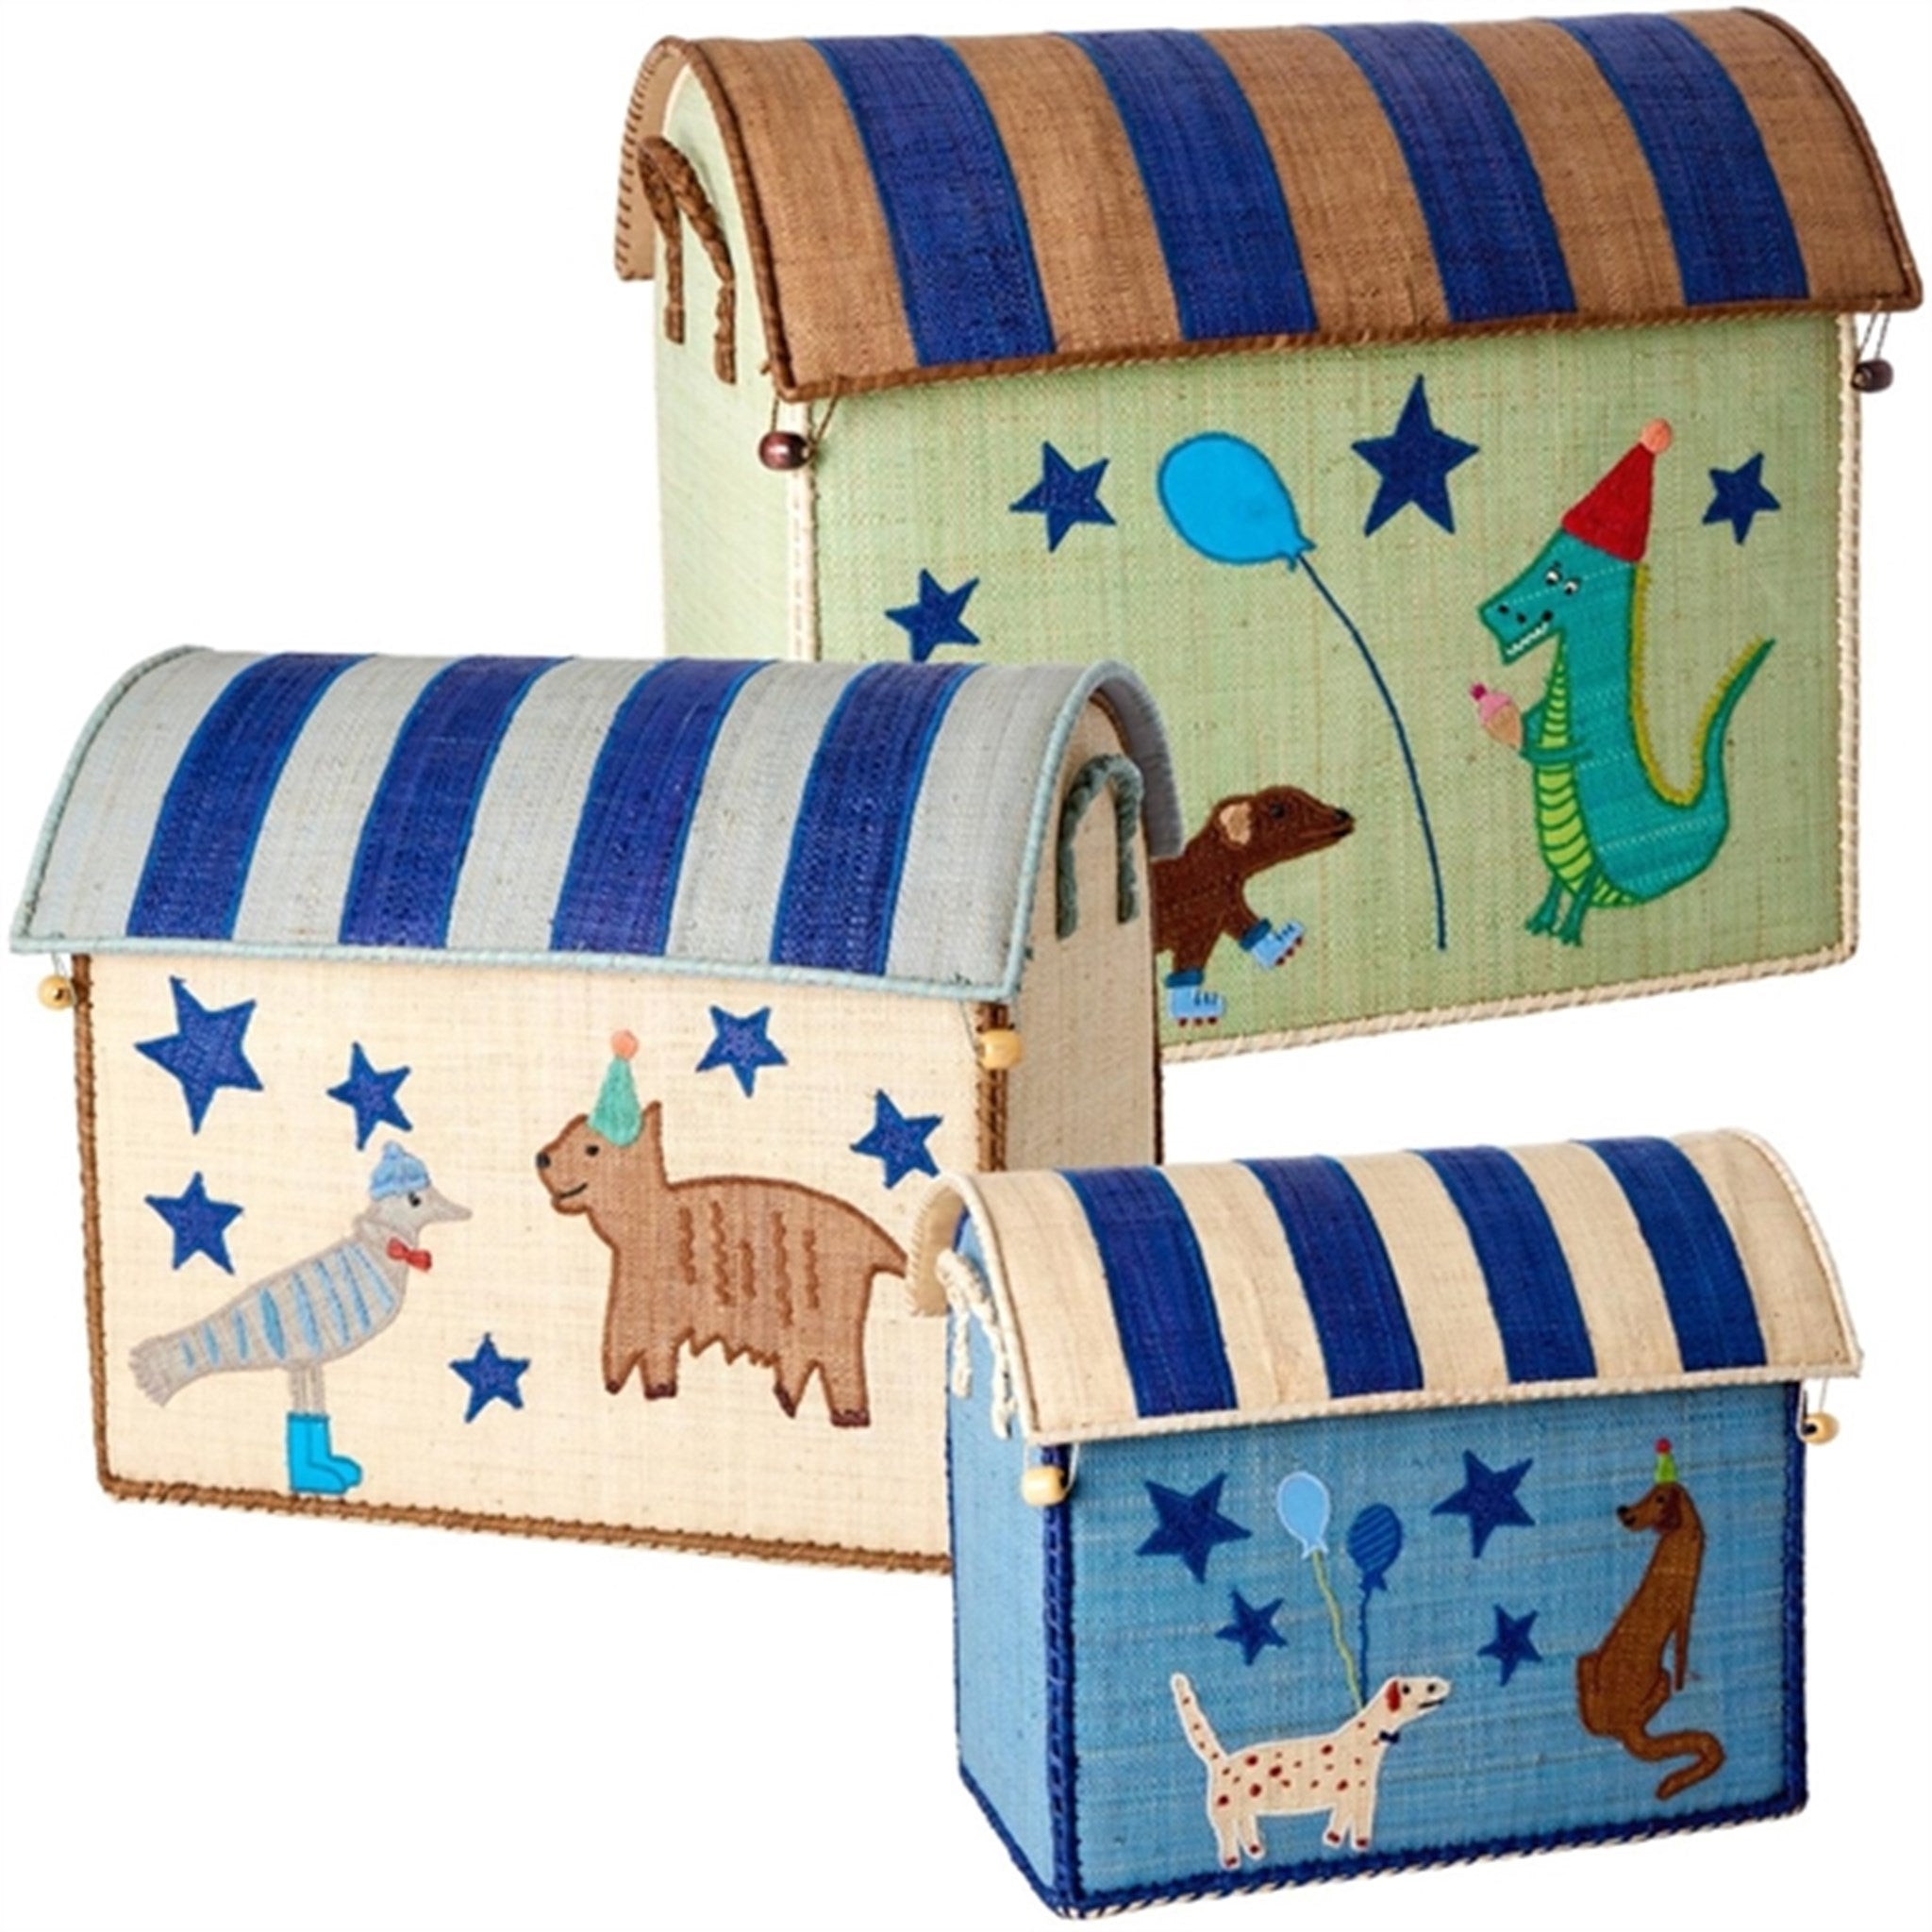 RICE Blue Party Animal Theme Raffia Baskets for Storage 3-pack